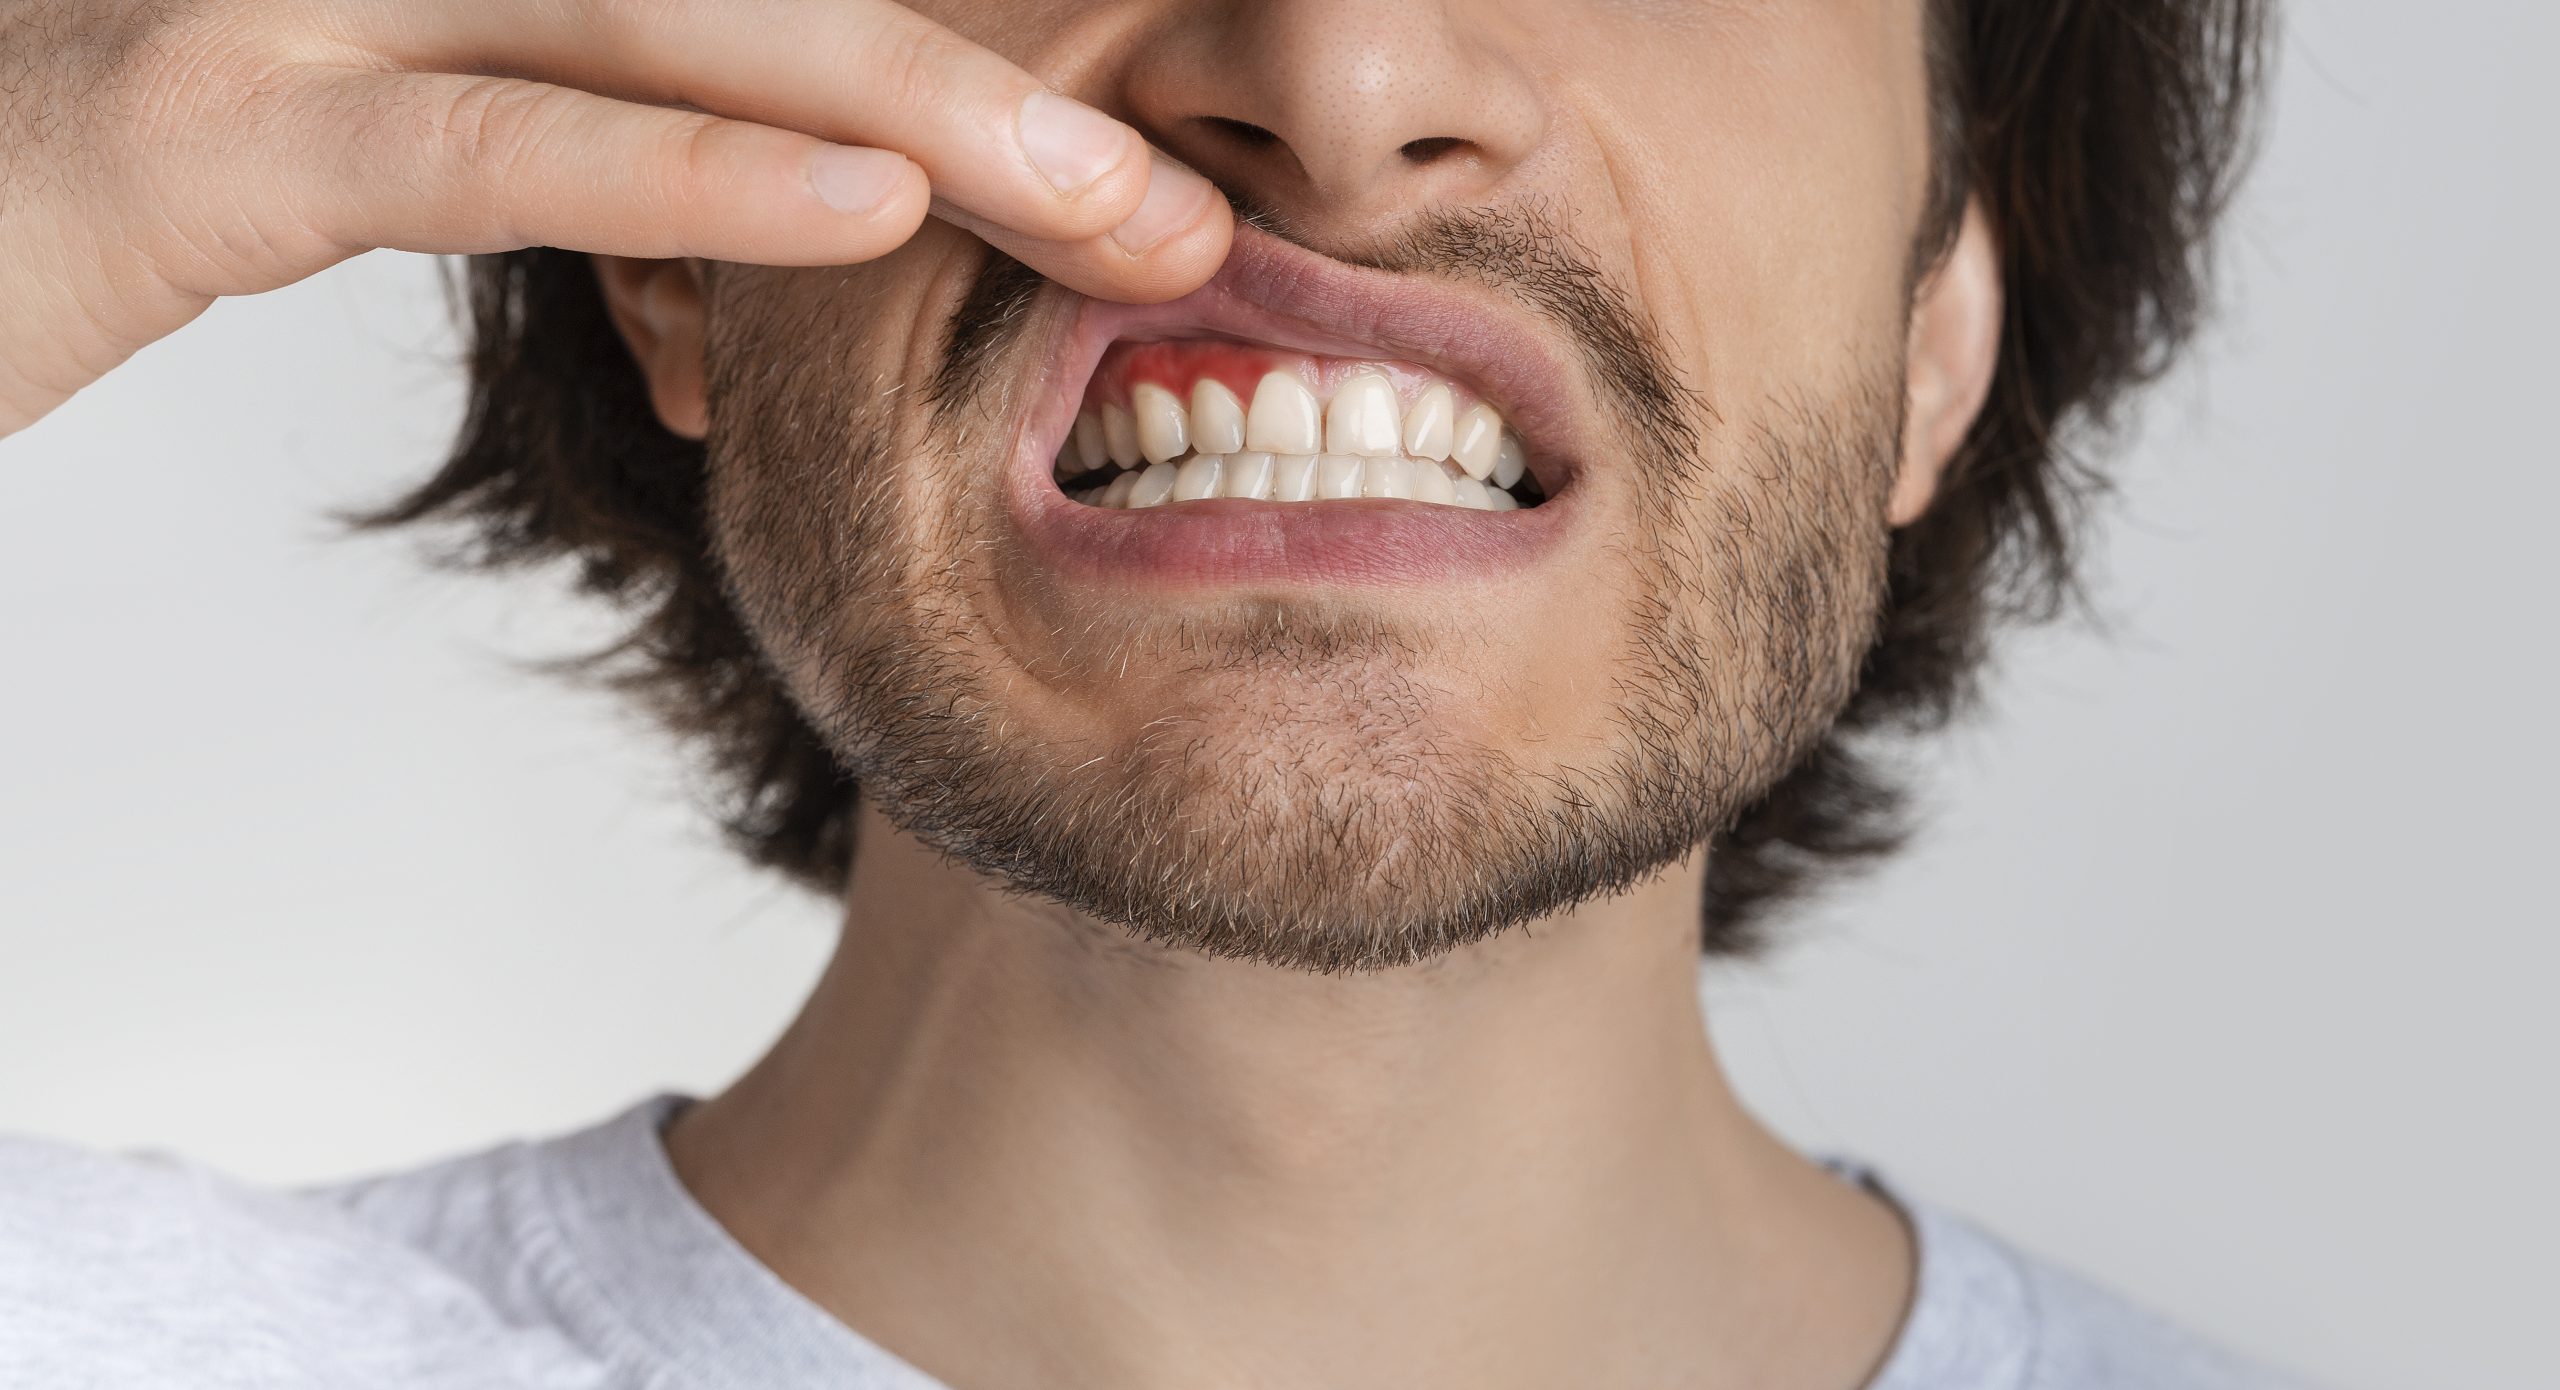 Study show snus causes gingival retraction and lesions